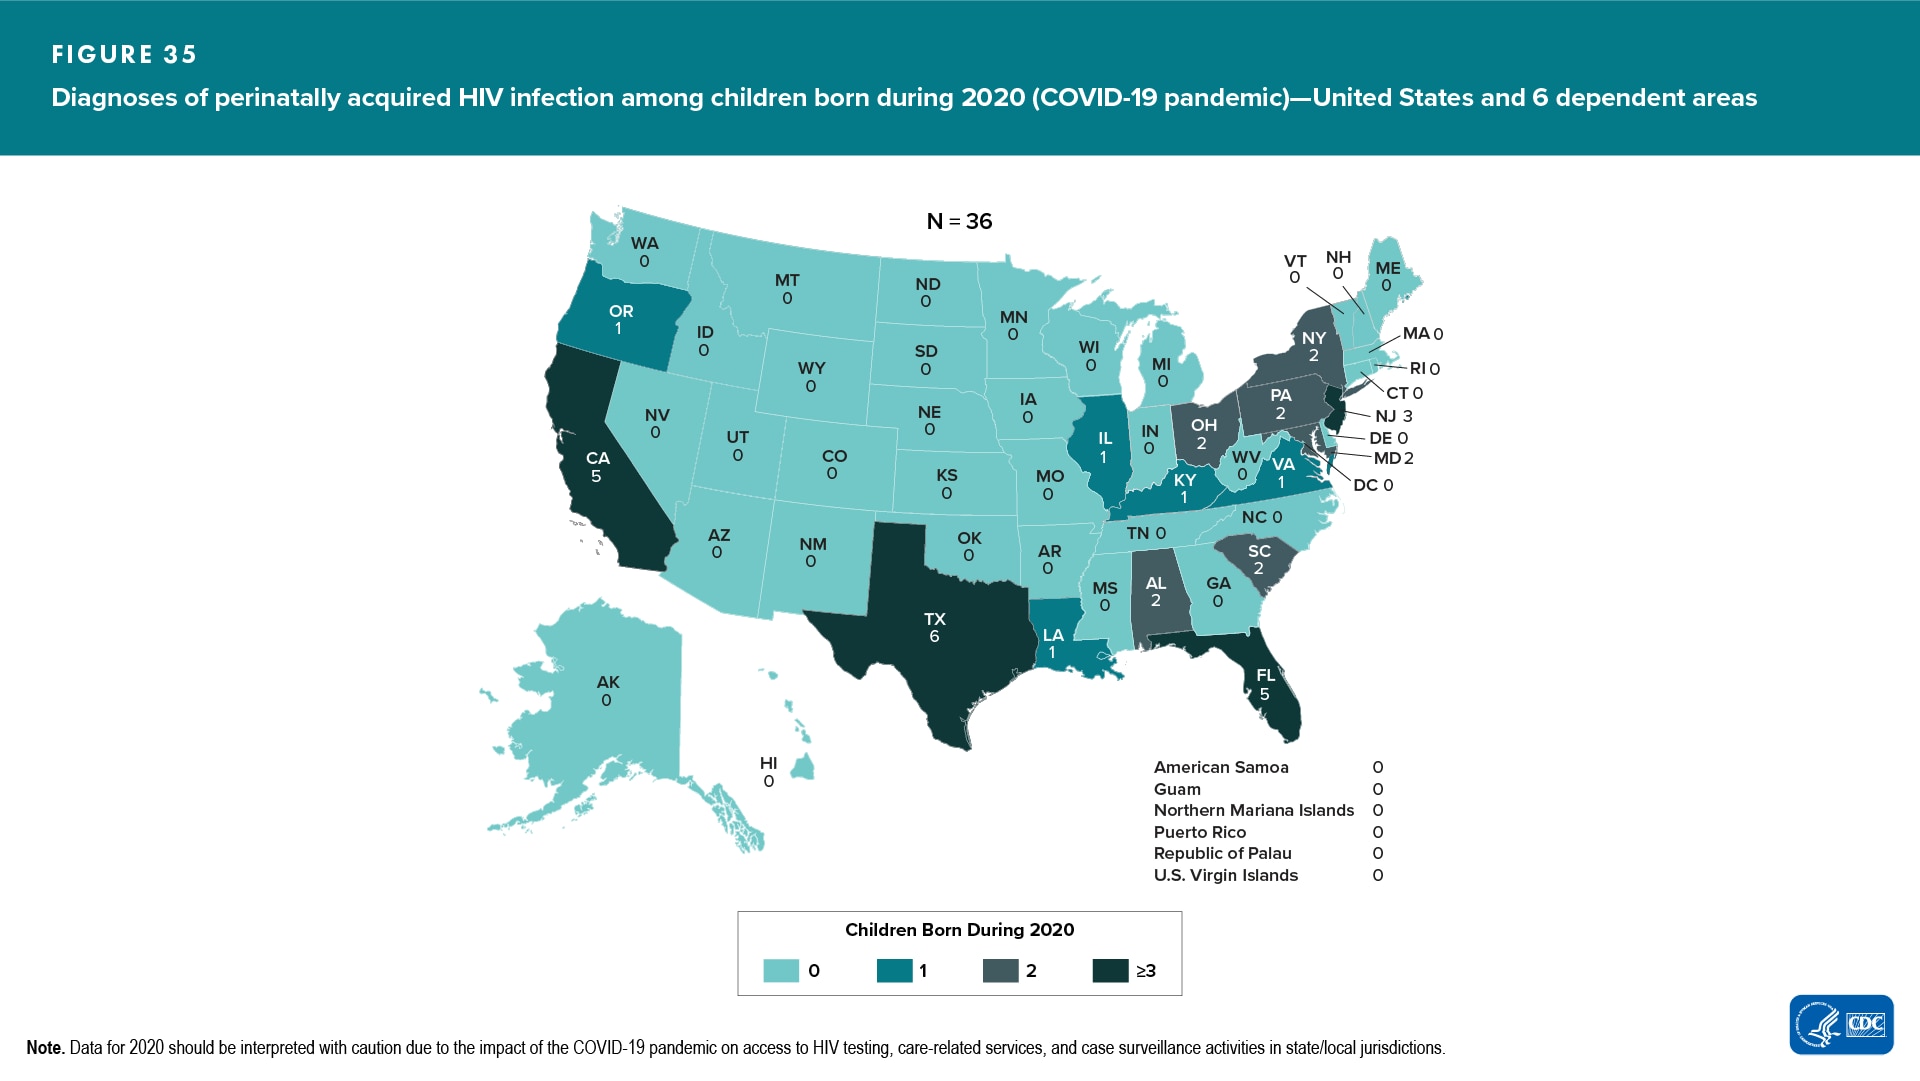 In the United States and 6 dependent areas, a total of 36 children born during 2020 received a diagnosis of HIV infection attributed to perinatal transmission. Forty-two areas in the United States and 6 dependent areas reported no perinatally acquired infections among infants born.